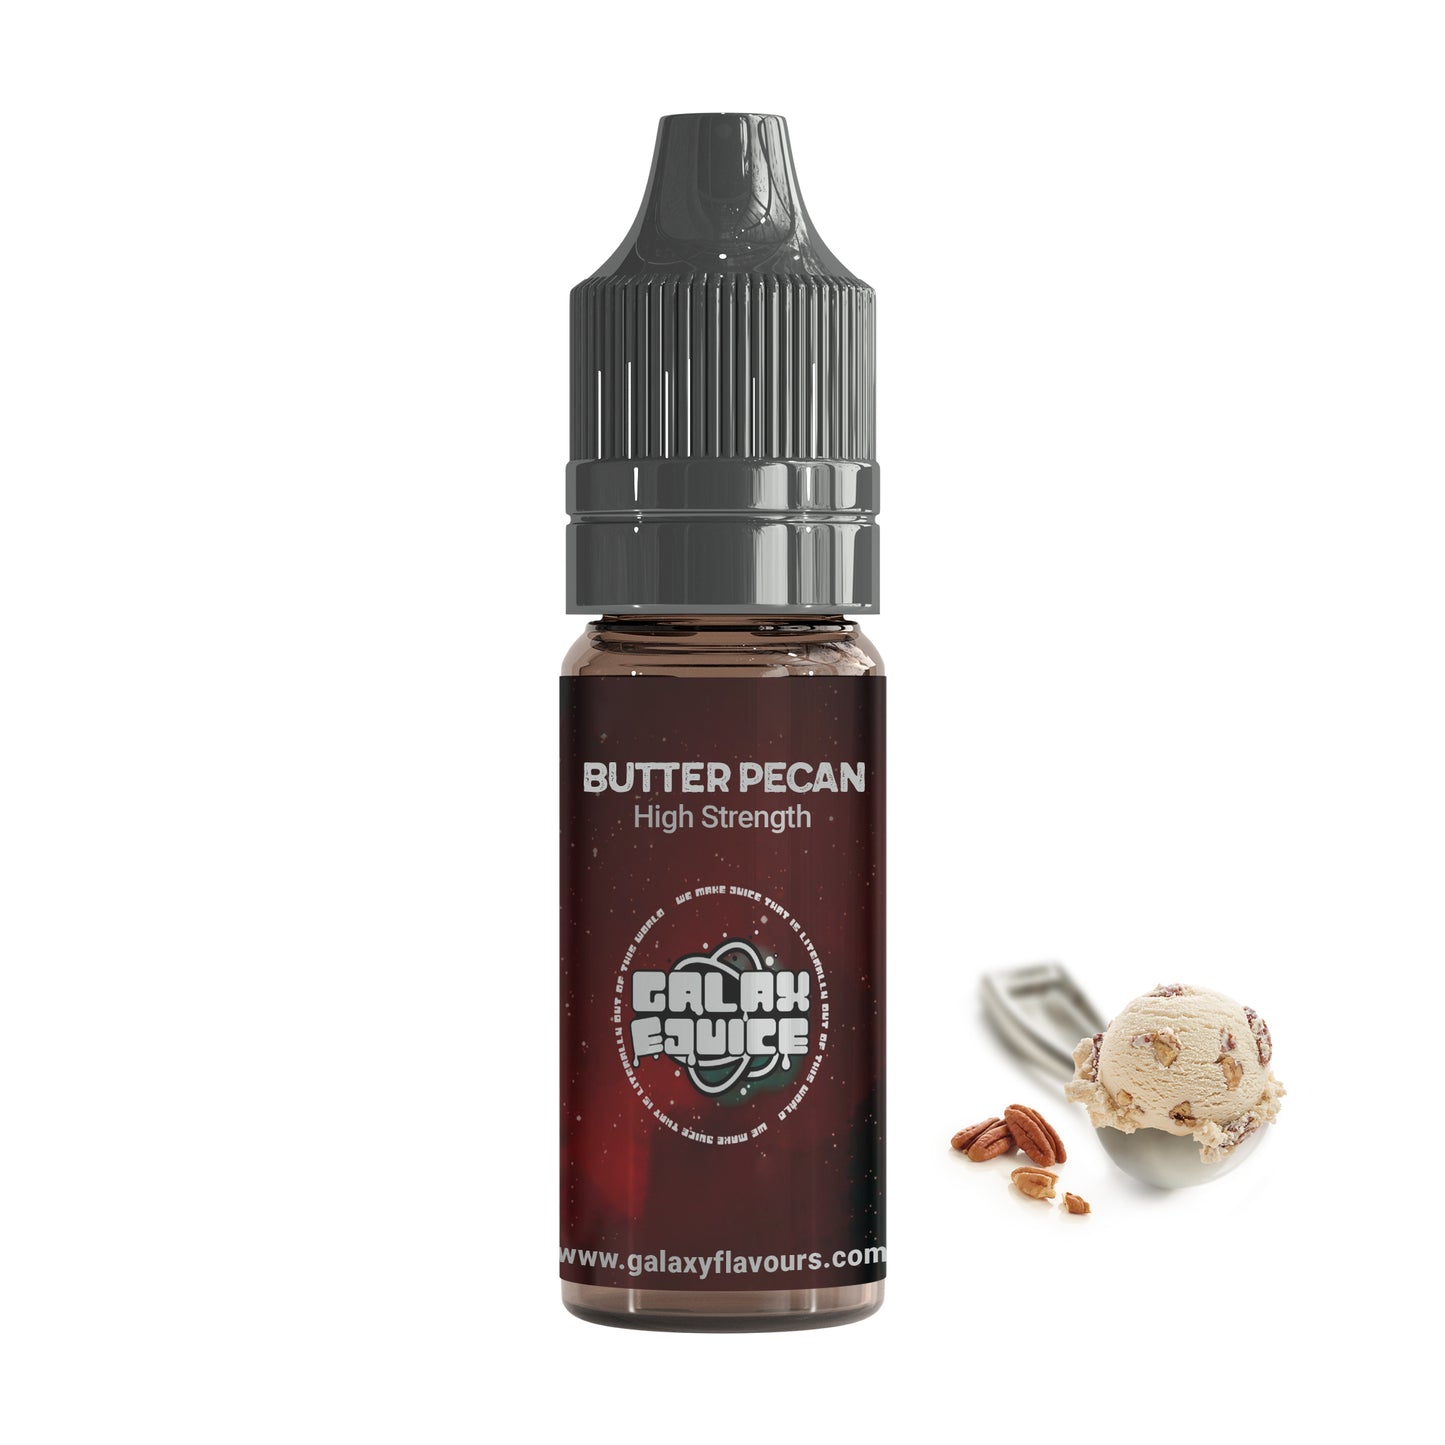 Butter Pecan High Strength Professional Flavouring.